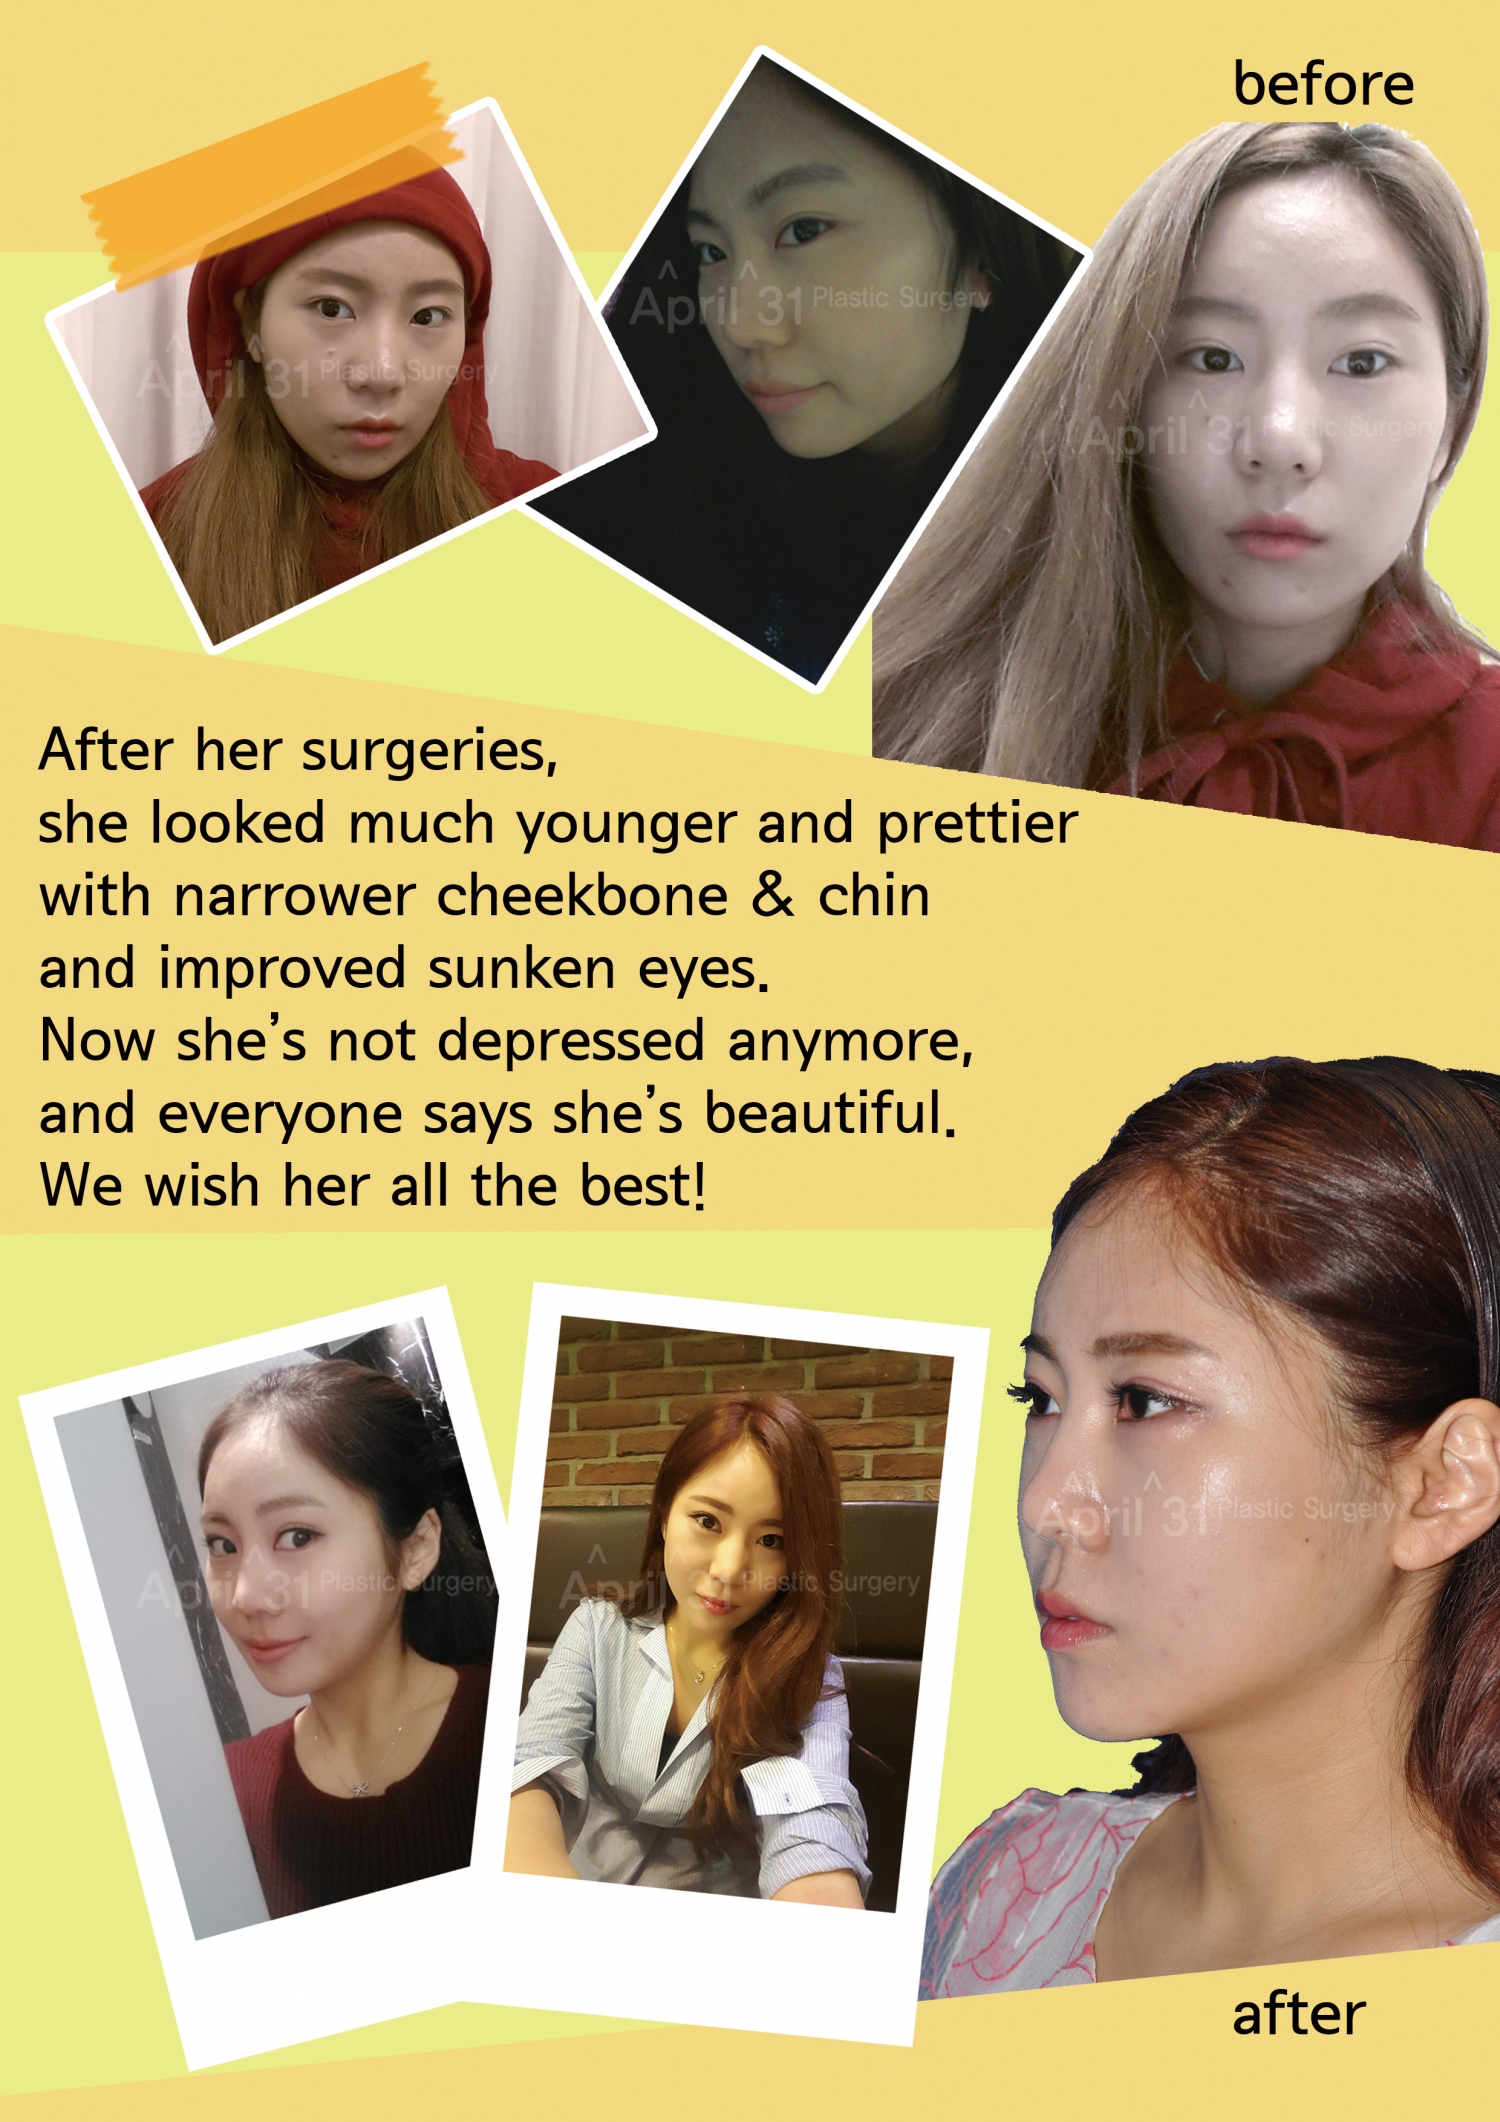 April 31 Plastic Surgery Clinic in Seoul